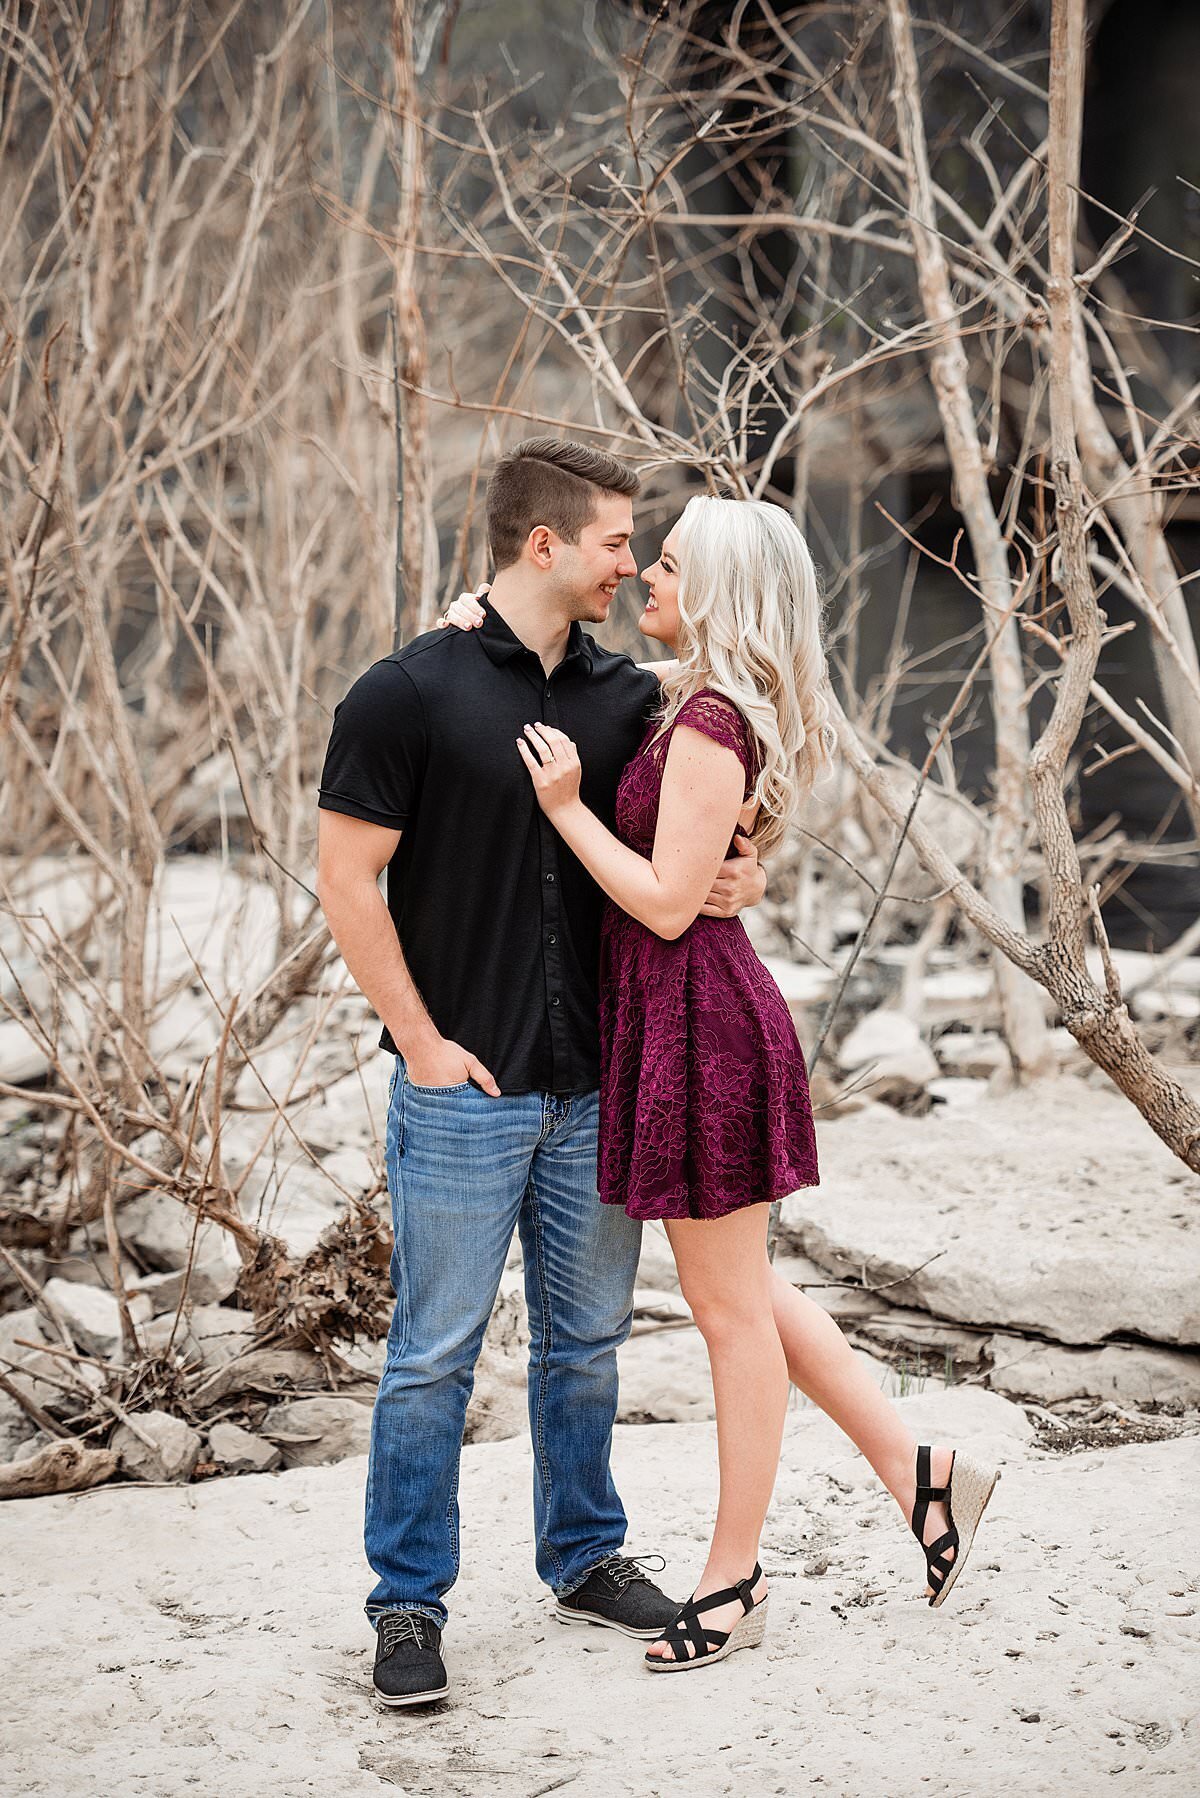 Winter engagement photos taken on Murfreesboro greenway near a river with girl wearing a maroon lace dress and groom a black polo shirt and jeans, they are snuggled together and embracing